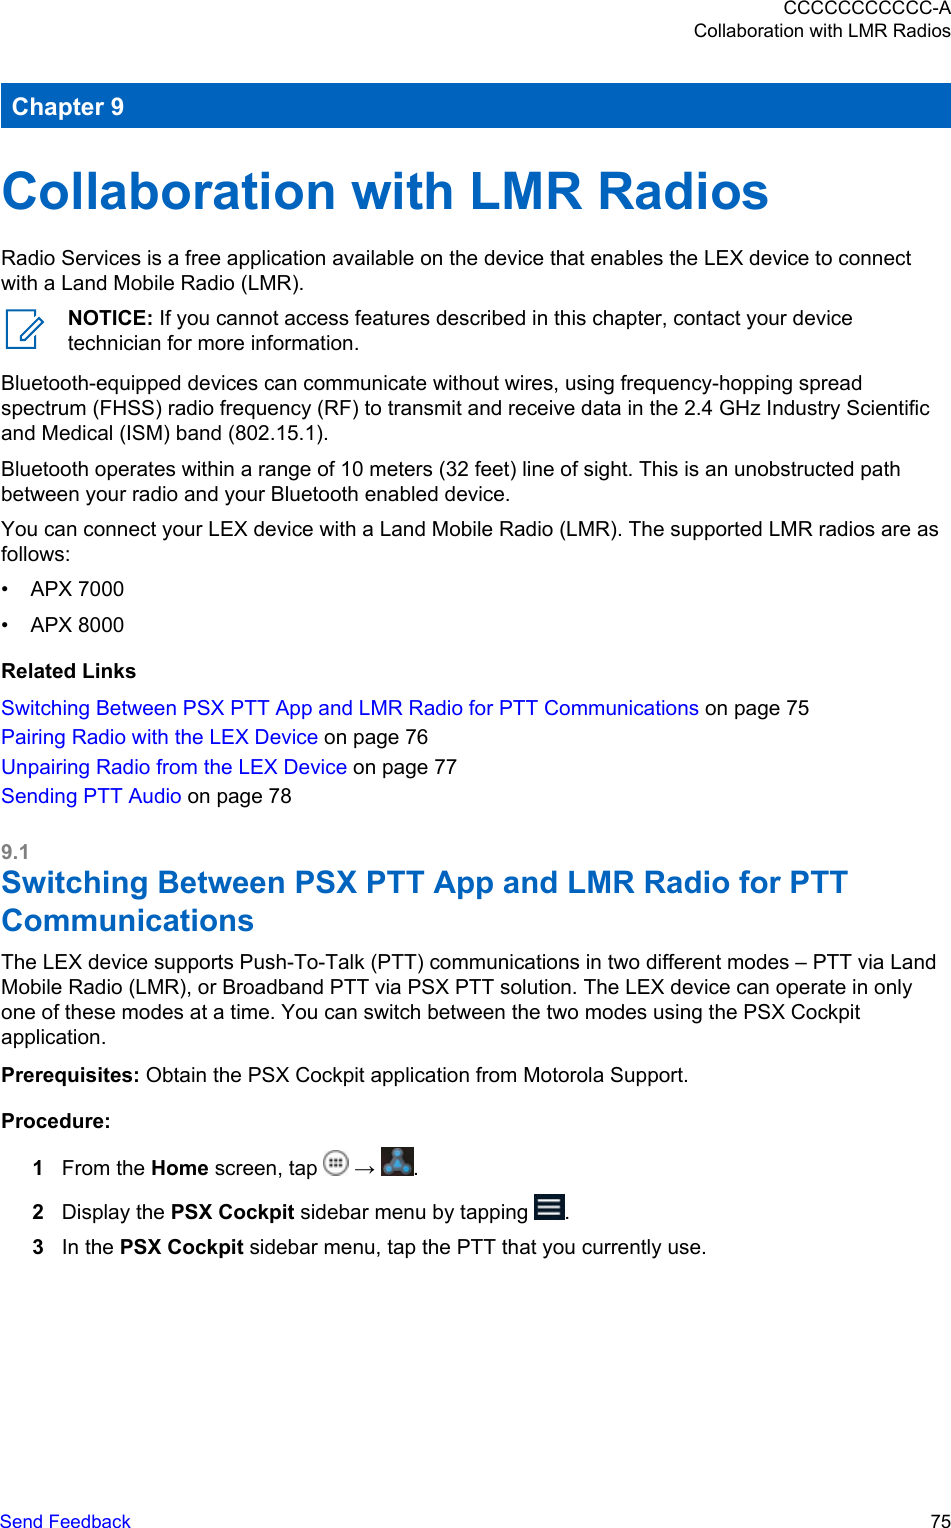 Chapter 9Collaboration with LMR RadiosRadio Services is a free application available on the device that enables the LEX device to connectwith a Land Mobile Radio (LMR).NOTICE: If you cannot access features described in this chapter, contact your devicetechnician for more information.Bluetooth-equipped devices can communicate without wires, using frequency-hopping spreadspectrum (FHSS) radio frequency (RF) to transmit and receive data in the 2.4 GHz Industry Scientificand Medical (ISM) band (802.15.1).Bluetooth operates within a range of 10 meters (32 feet) line of sight. This is an unobstructed pathbetween your radio and your Bluetooth enabled device.You can connect your LEX device with a Land Mobile Radio (LMR). The supported LMR radios are asfollows:• APX 7000• APX 8000Related LinksSwitching Between PSX PTT App and LMR Radio for PTT Communications on page 75Pairing Radio with the LEX Device on page 76Unpairing Radio from the LEX Device on page 77Sending PTT Audio on page 789.1Switching Between PSX PTT App and LMR Radio for PTTCommunicationsThe LEX device supports Push-To-Talk (PTT) communications in two different modes – PTT via LandMobile Radio (LMR), or Broadband PTT via PSX PTT solution. The LEX device can operate in onlyone of these modes at a time. You can switch between the two modes using the PSX Cockpitapplication.Prerequisites: Obtain the PSX Cockpit application from Motorola Support.Procedure:1From the Home screen, tap   →  .2Display the PSX Cockpit sidebar menu by tapping  .3In the PSX Cockpit sidebar menu, tap the PTT that you currently use.CCCCCCCCCCC-ACollaboration with LMR RadiosSend Feedback   75